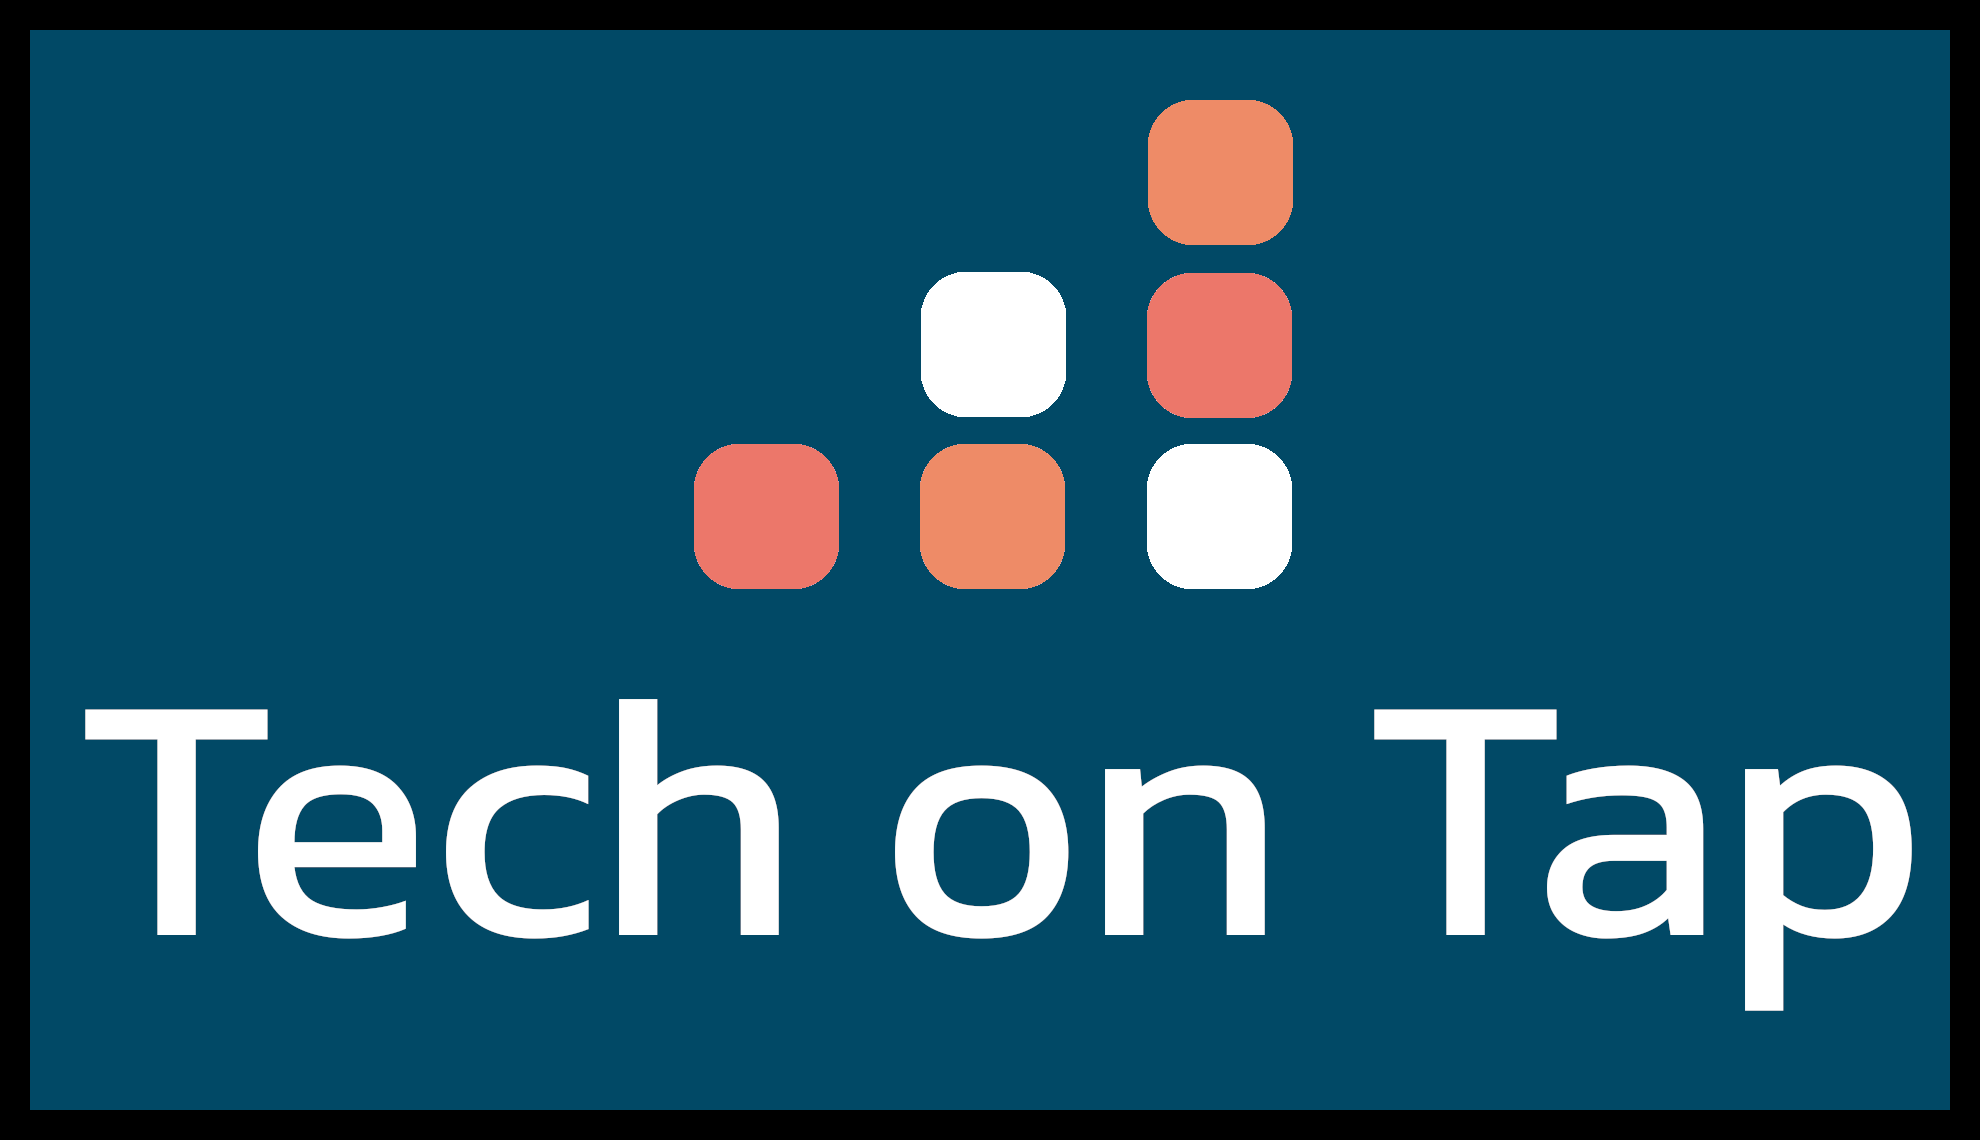 Tech on Tap Logo.  Pale blue background with the writing Tech on Tap and a drawn logo of squares stacking up to denote progress